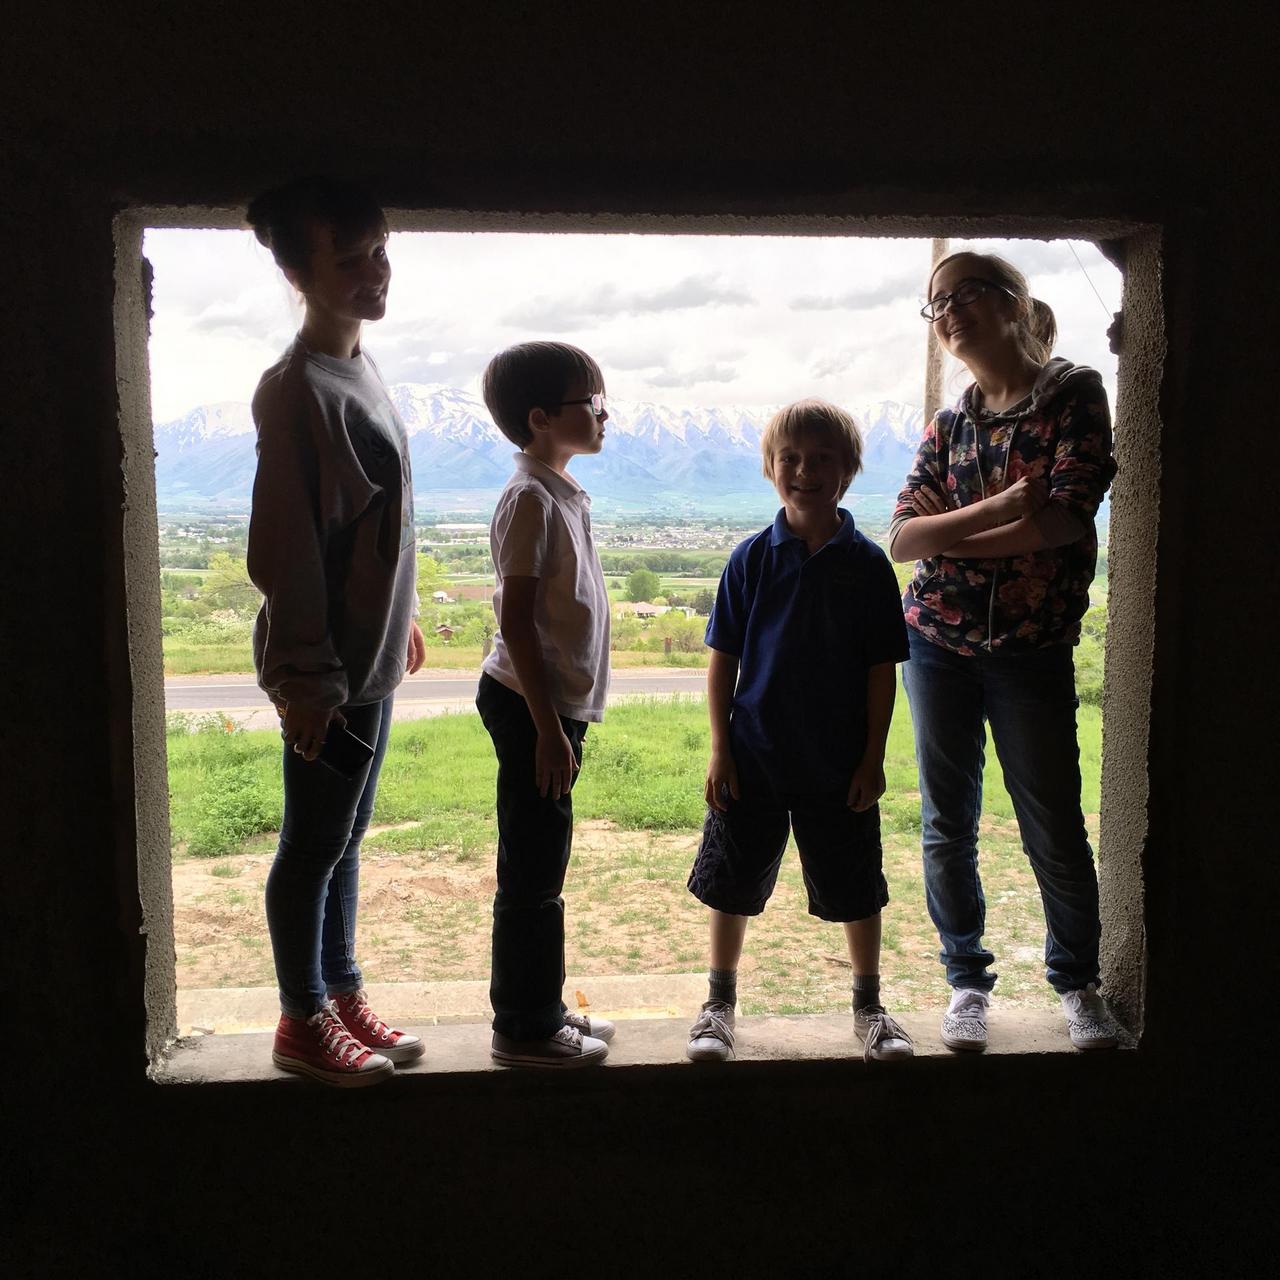 The four South children standing in a window opening.